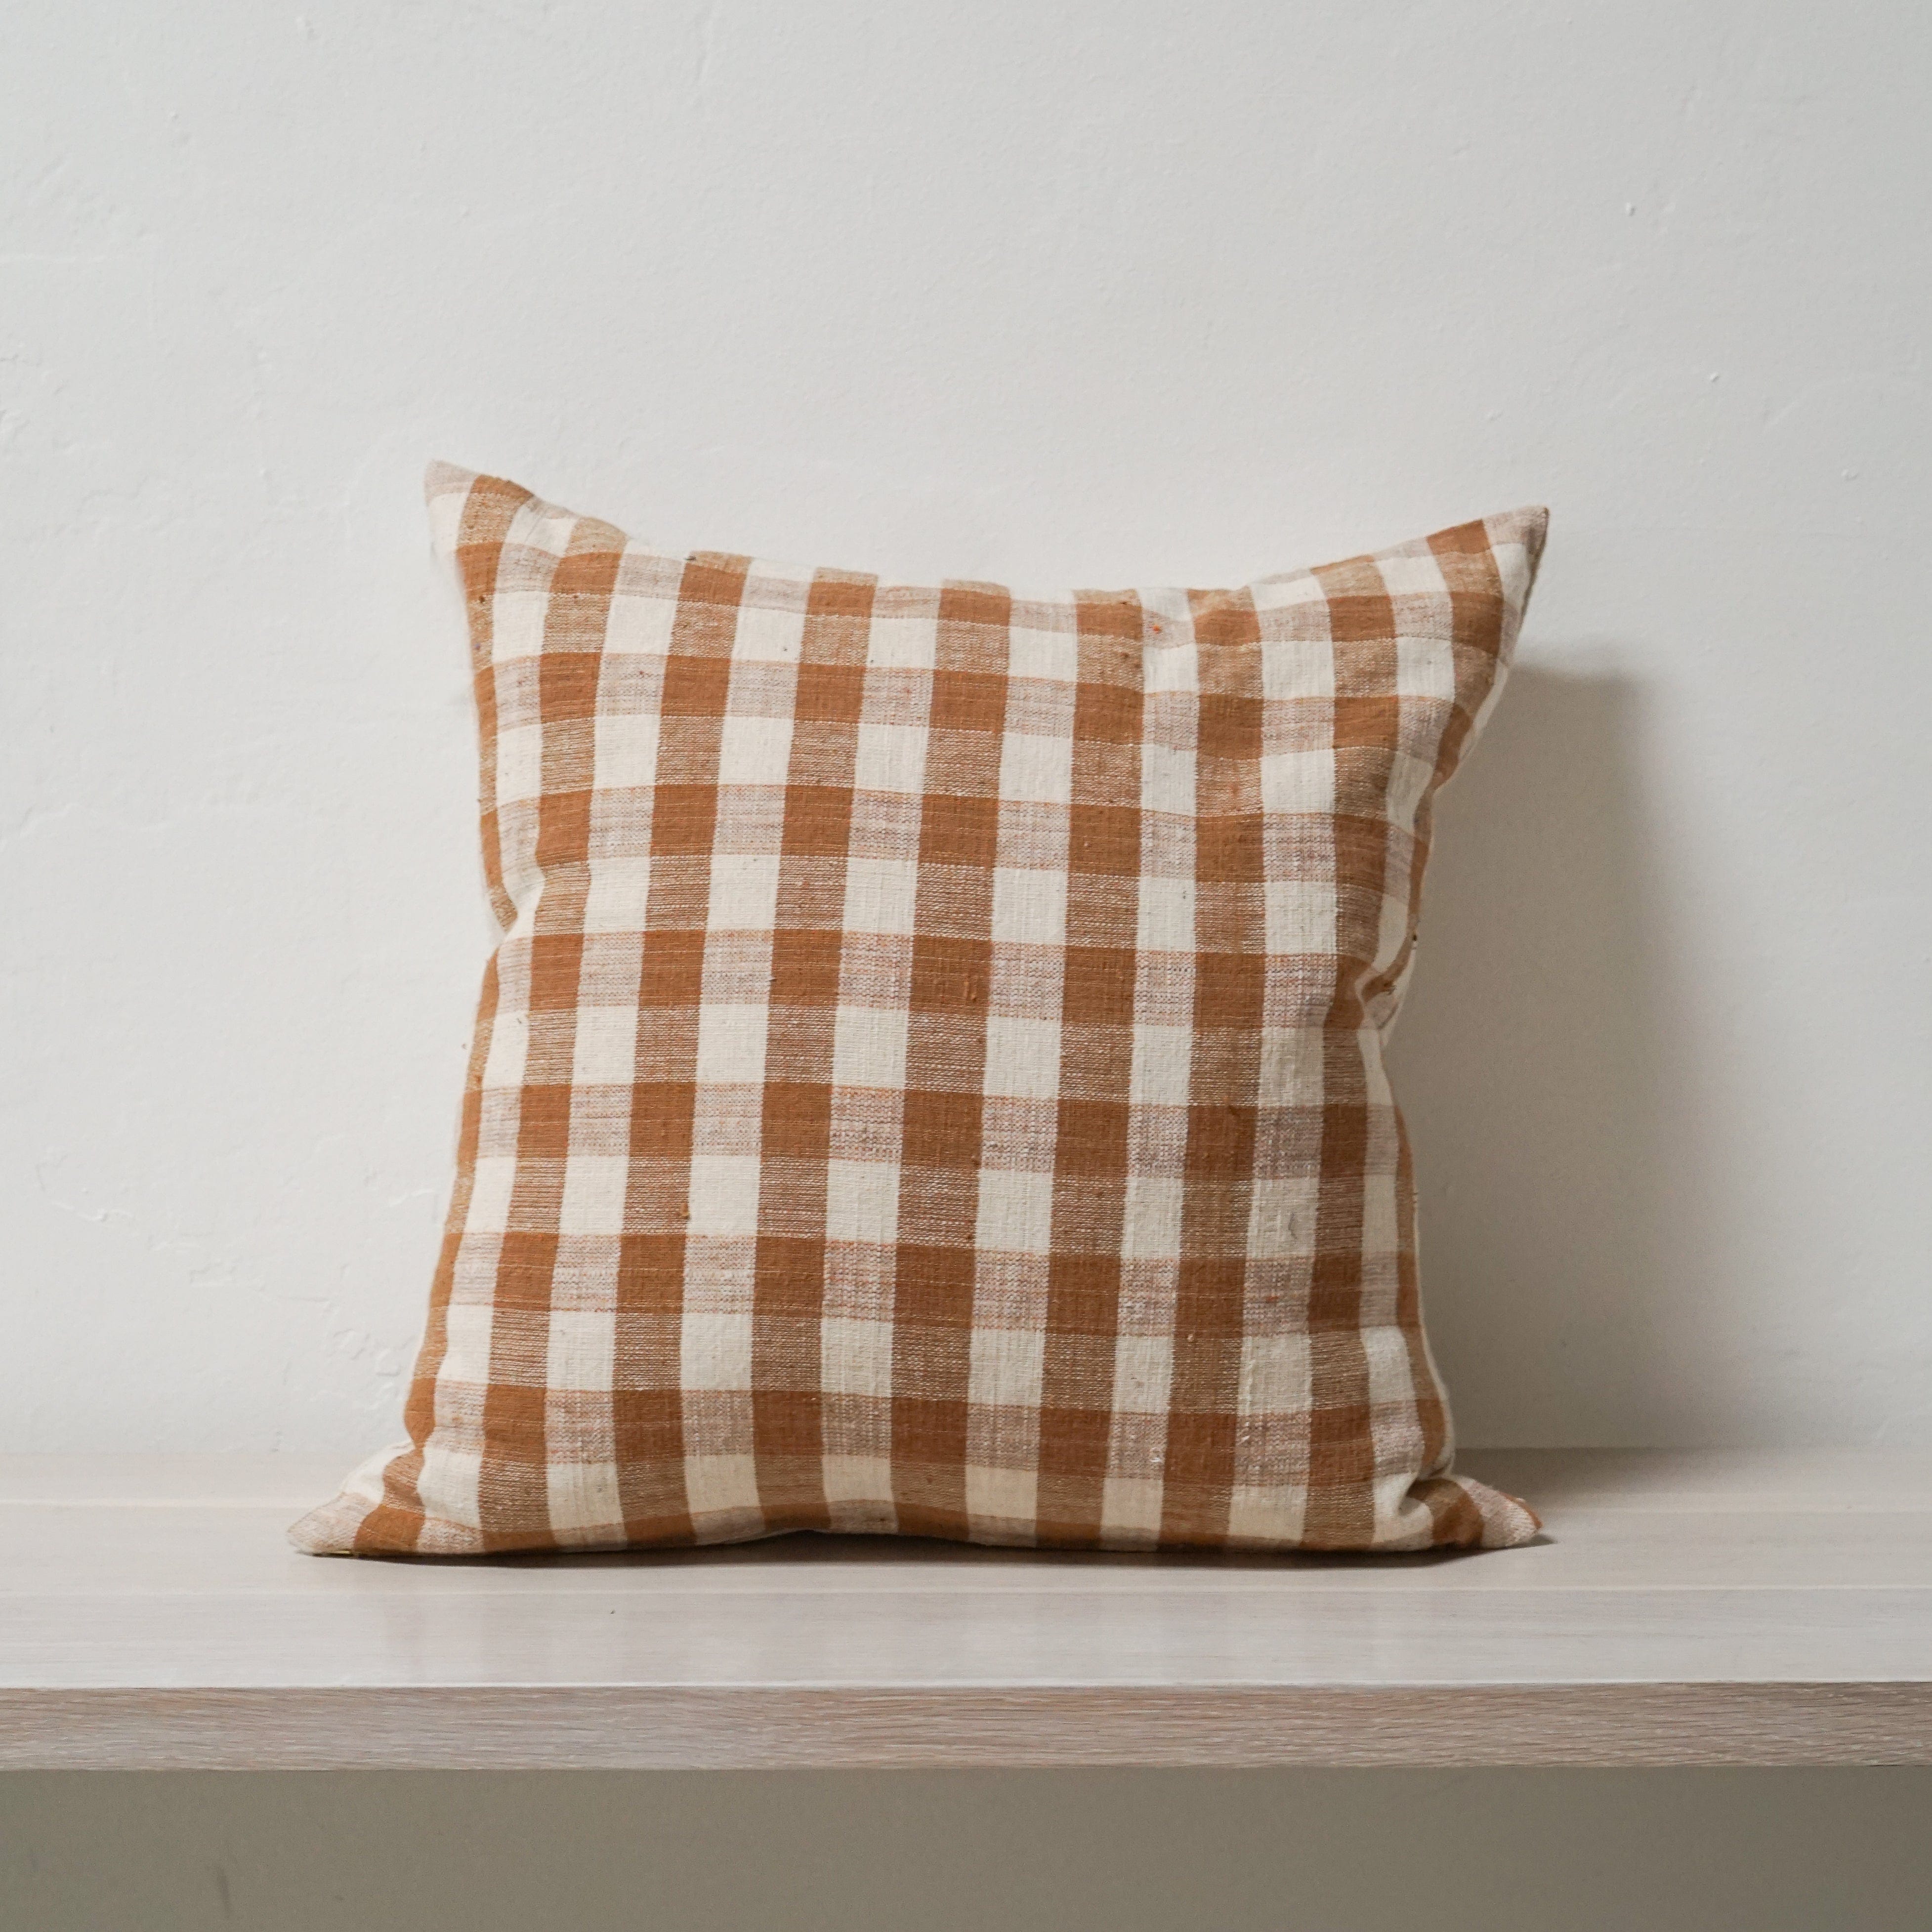 Lineage Botanica Pillows Square 20" x 20" Cream and Rust Plaid Linen Pillow